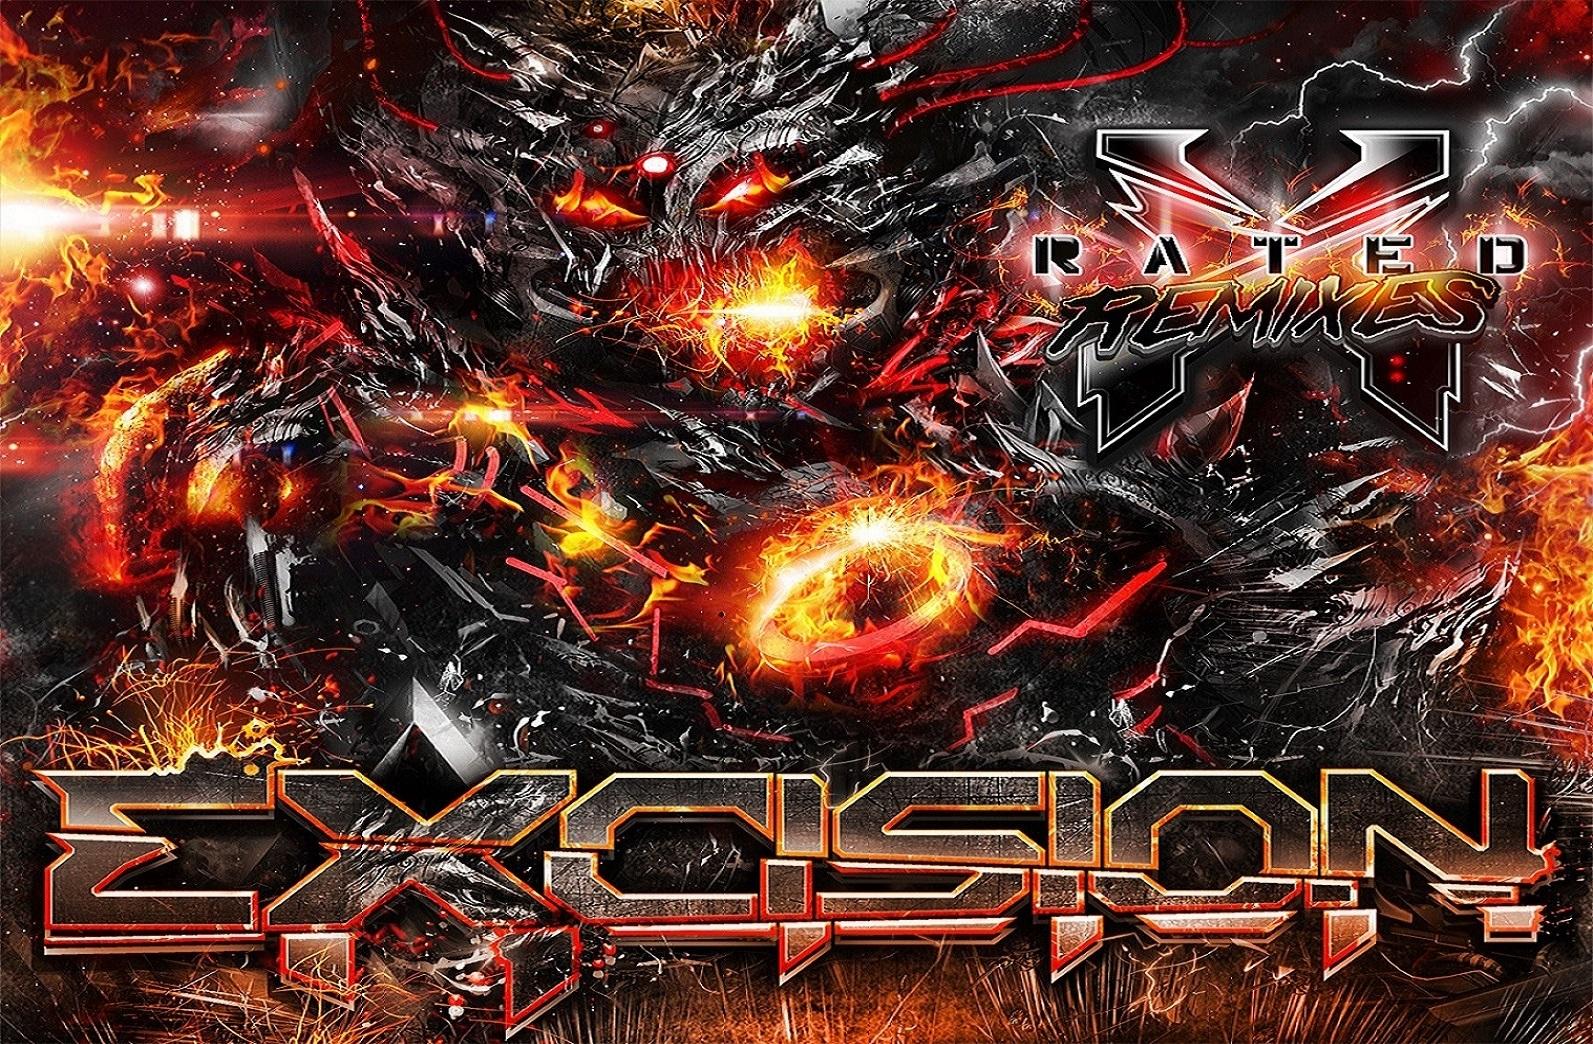 Excision X rated remixes wallpaper.